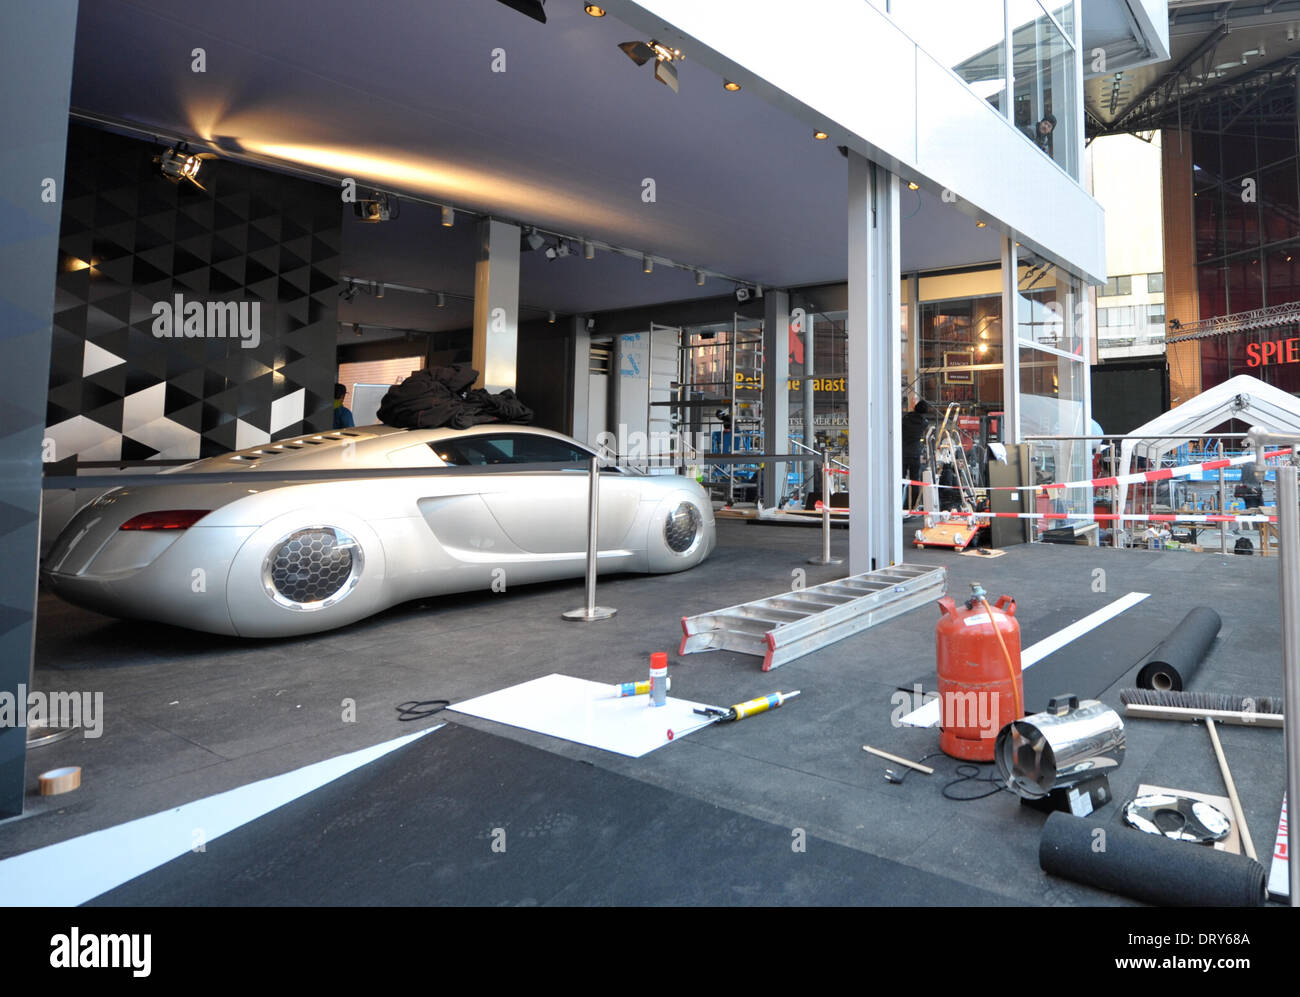 Berlin, Germany. 05th Feb, 2013. An Audi 'I ROBOT' RSQ is pictured in the Audi Lounge in front of the Berlinale Palace in Berlin, Germany, 05 February 2013. The custom-built car was used in the film 'I Robot' with Will Smith. Photo: Roland Popp/dpa/Alamy Live News Stock Photo